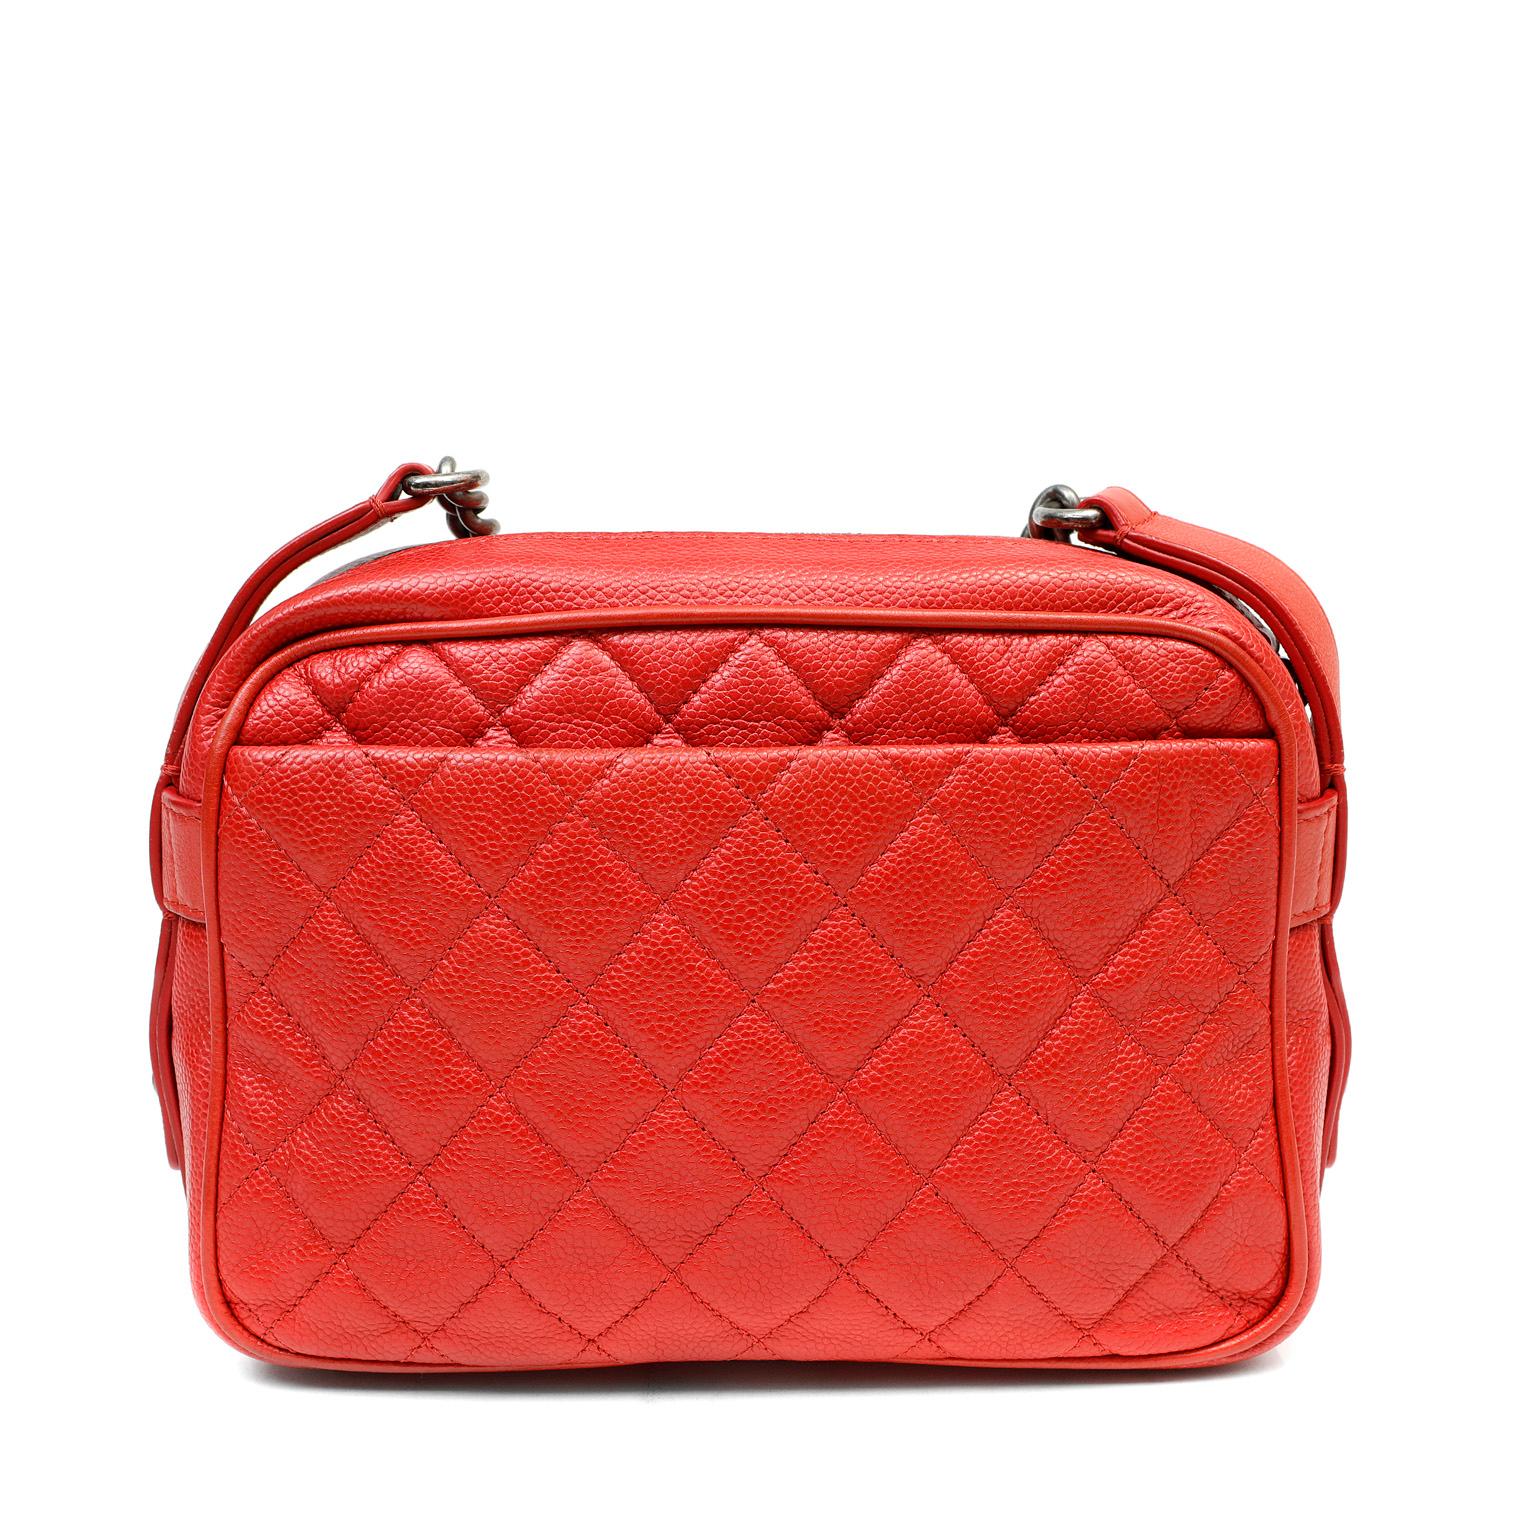 Women's Chanel Red Caviar Leather Crossbody Bag For Sale